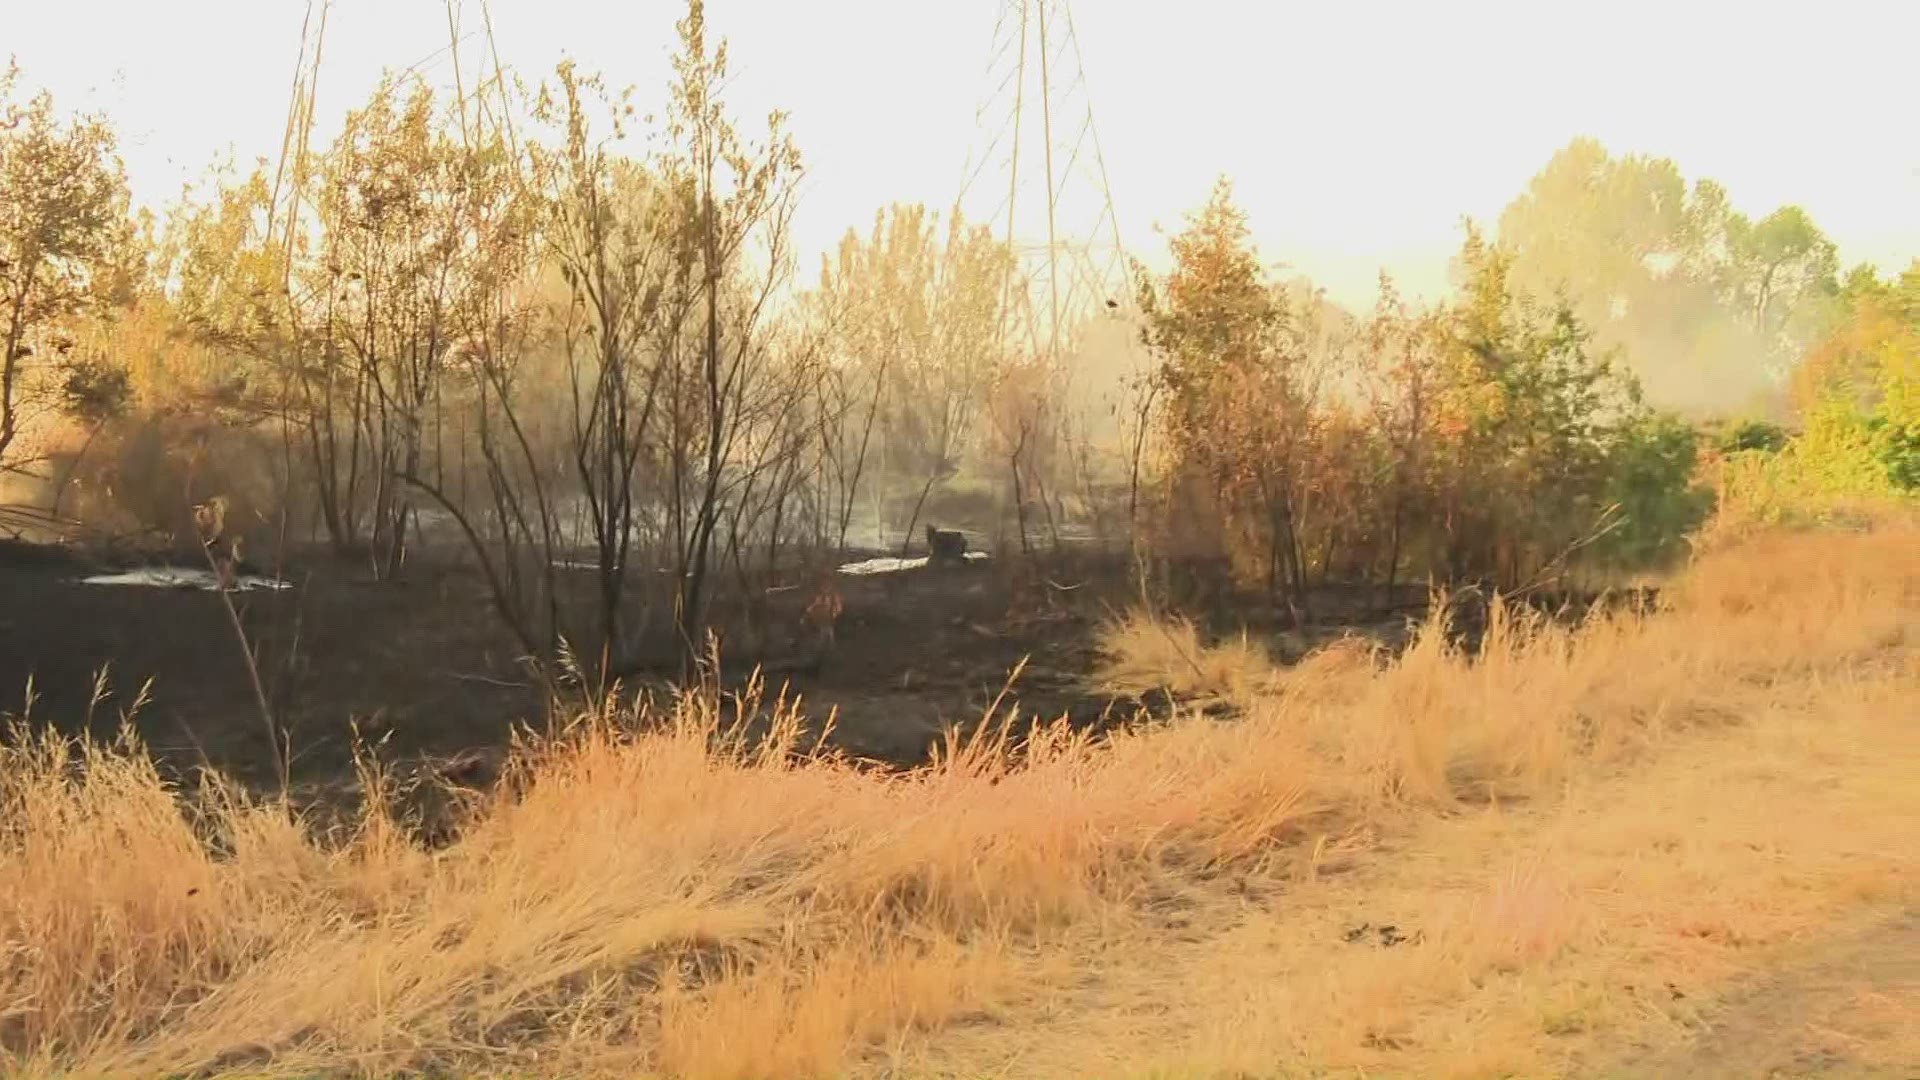 A one acre vegetation fire popped up Monday morning behind the Costco near Cal Expo.